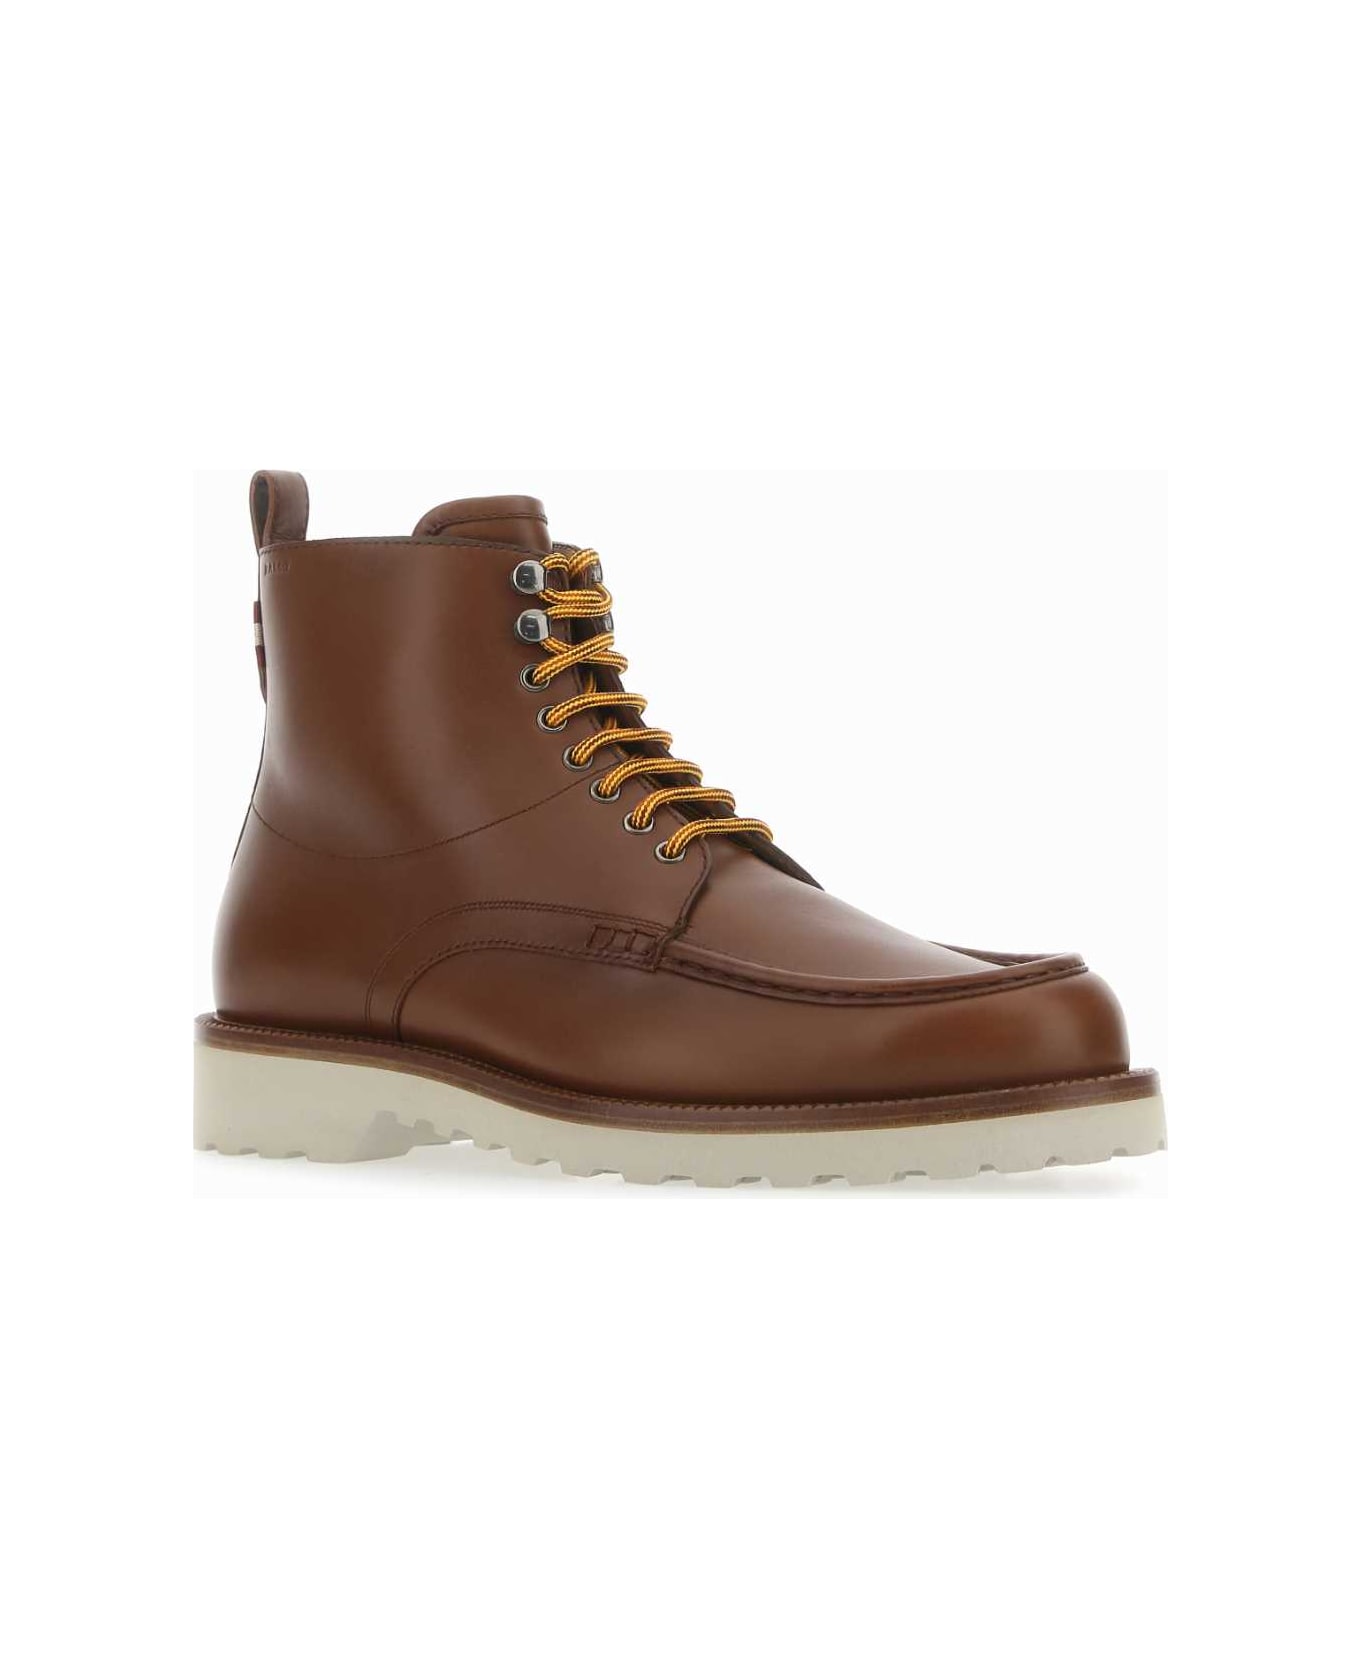 Bally Brown Leather Nobilus Ankle Boots - U808 ブーツ